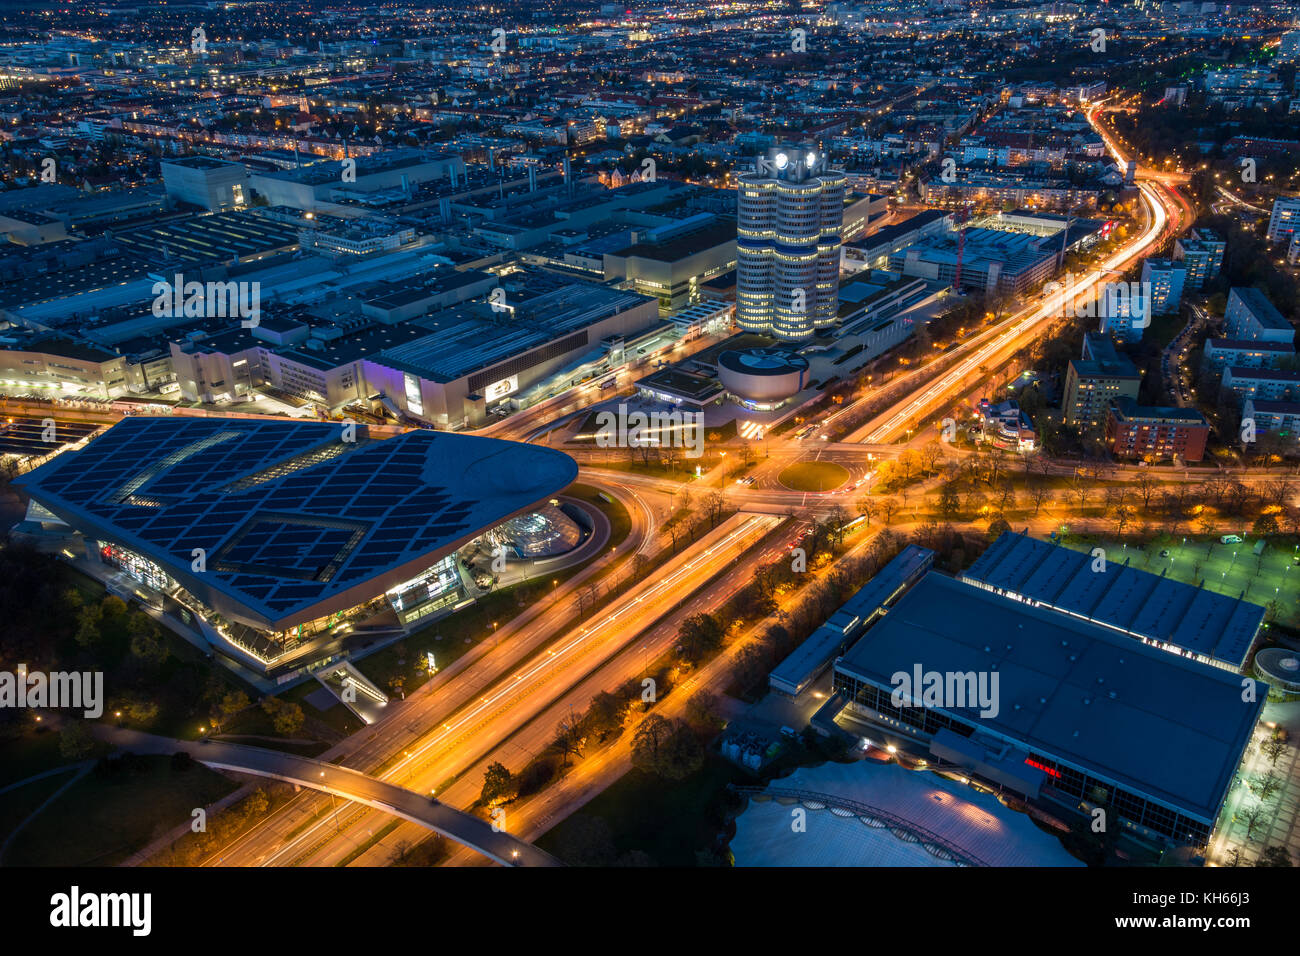 MUNICH, GERMANY - November 3, 2017: The lit BMW headquarters and BMW Welt with light trails from traffic during blue hour from above Stock Photo